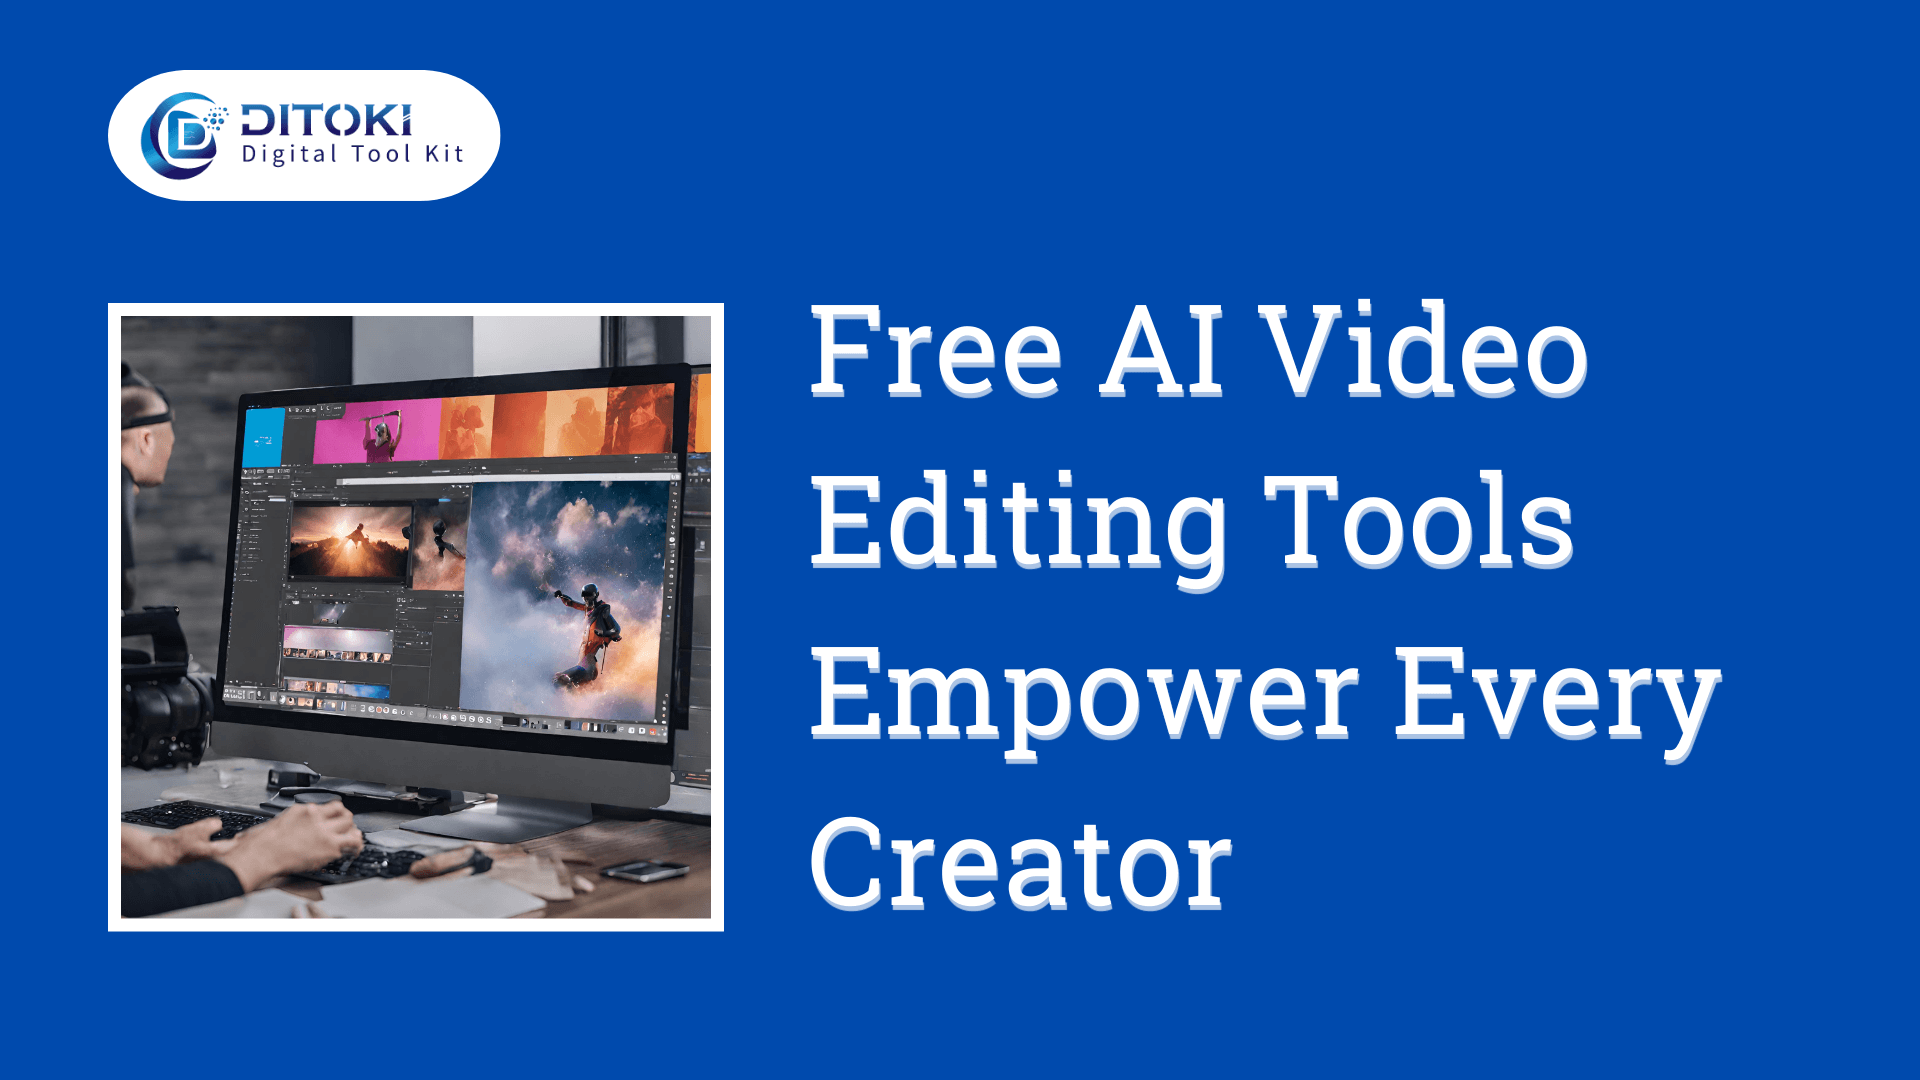 Embracing the Revolution: Free AI Video Editing Tools Empower Every Creator